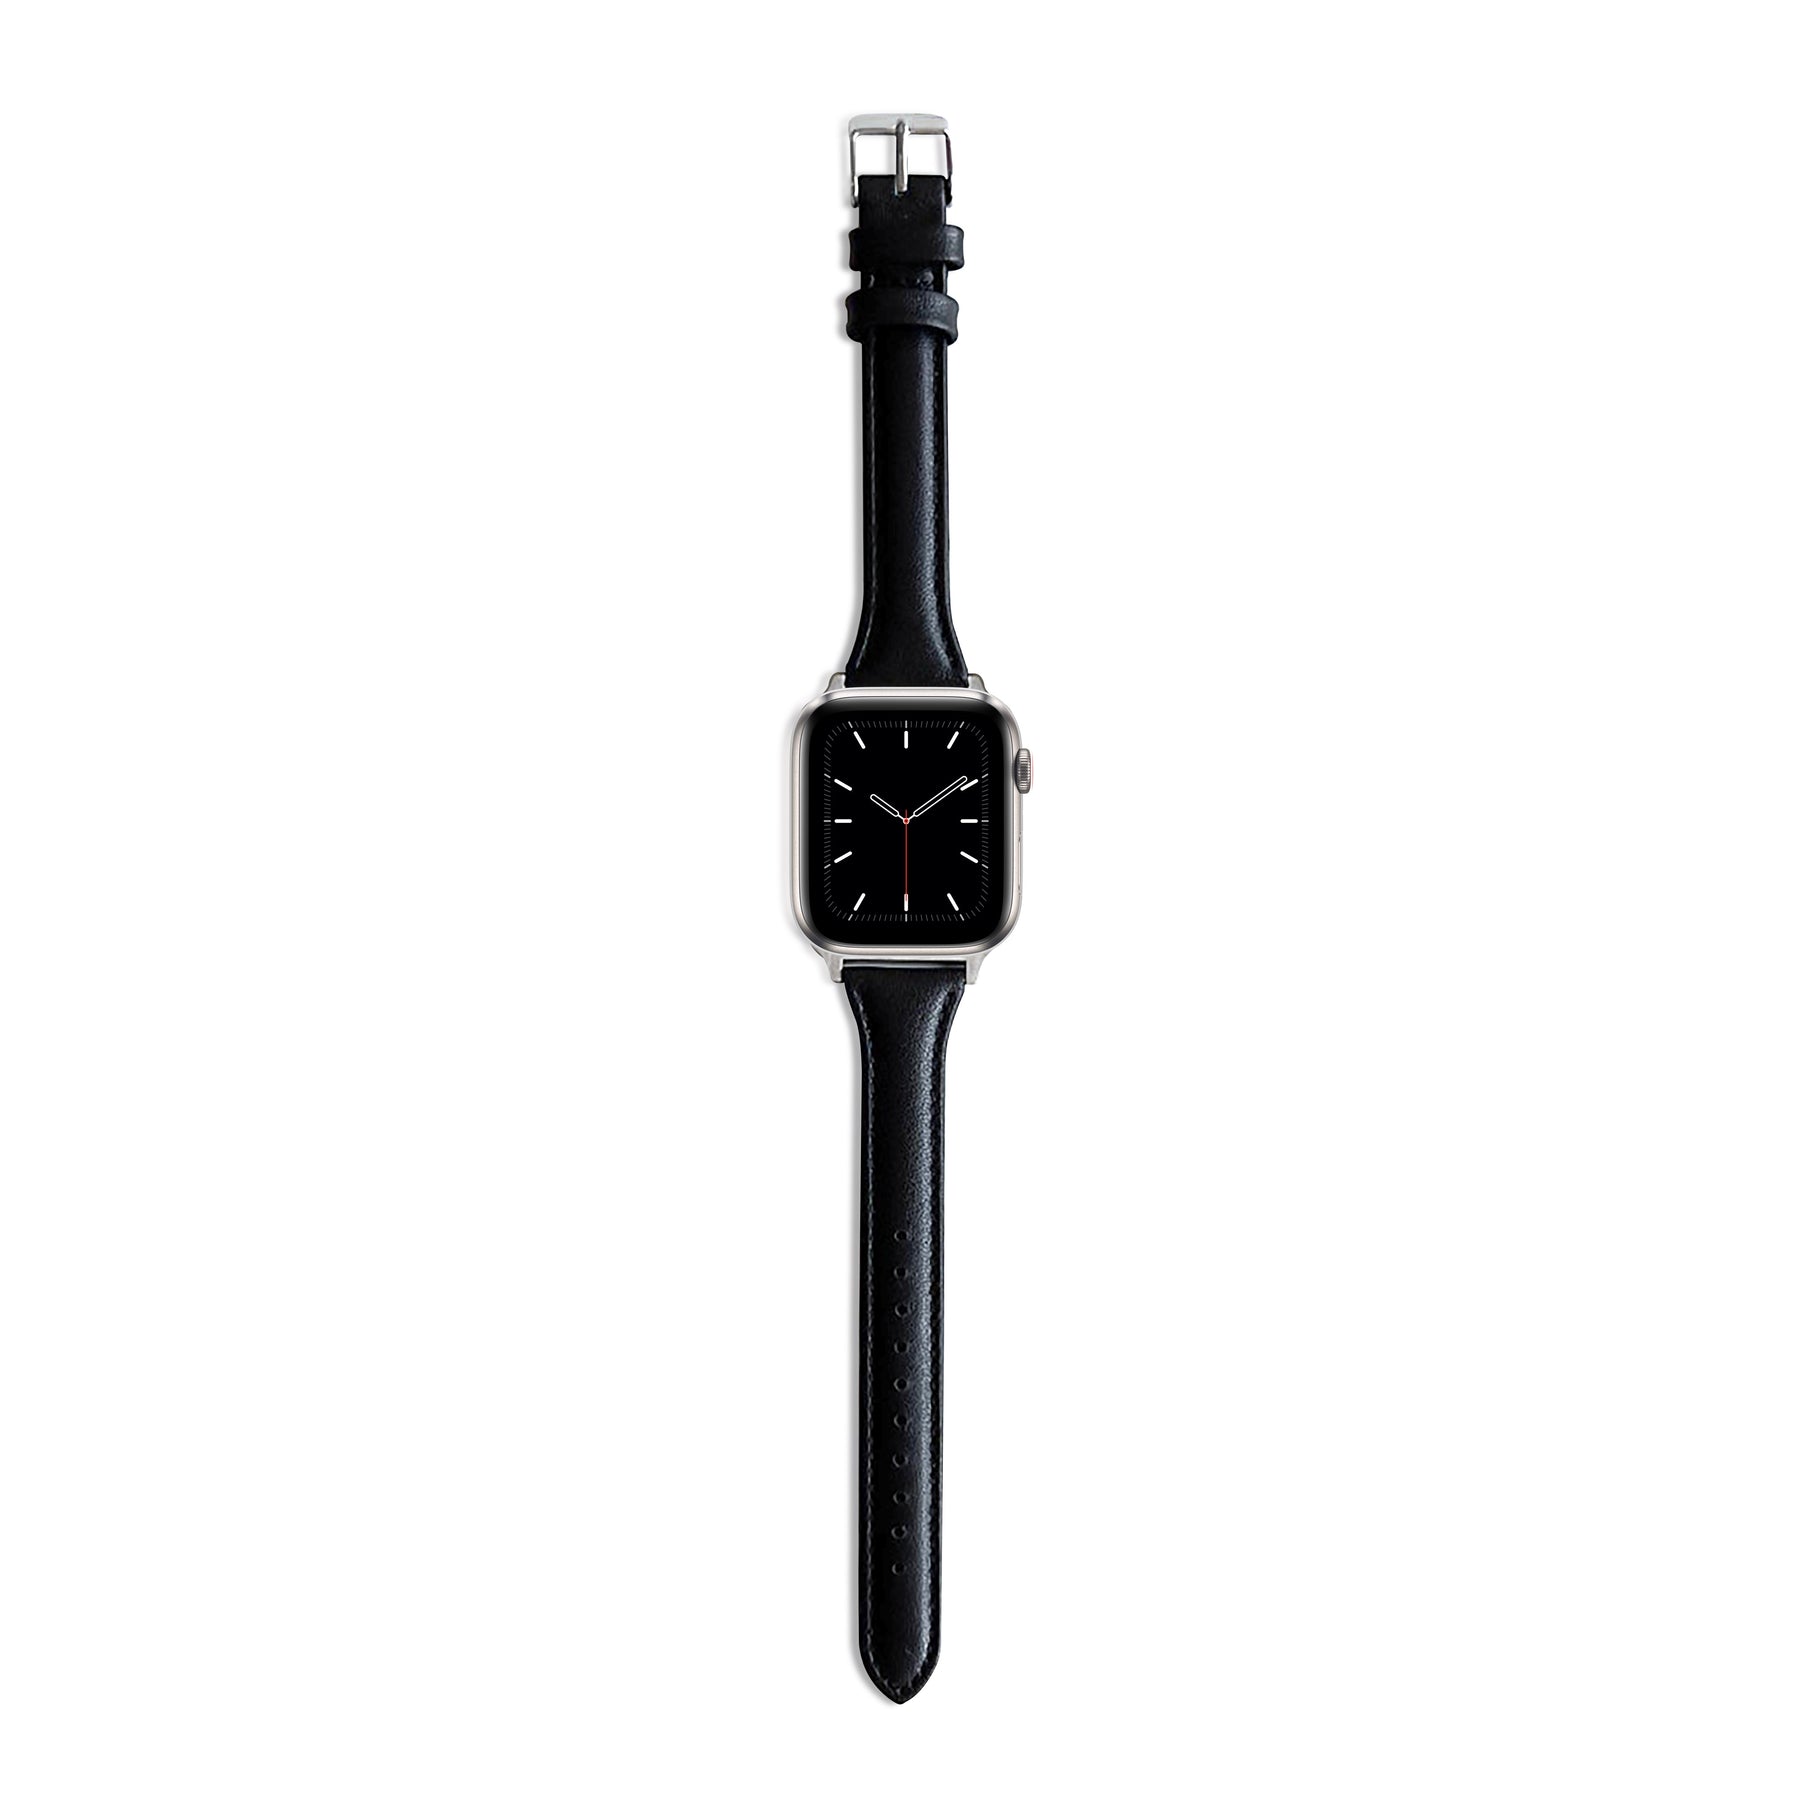 Shop Apple Watch leather strap with ManMade Cycle today. We offer the best Apple Watch strap compare to my pretty strap apple watch strap. Shop now with multiple years of warranty and 14 days change of mind warranty. 